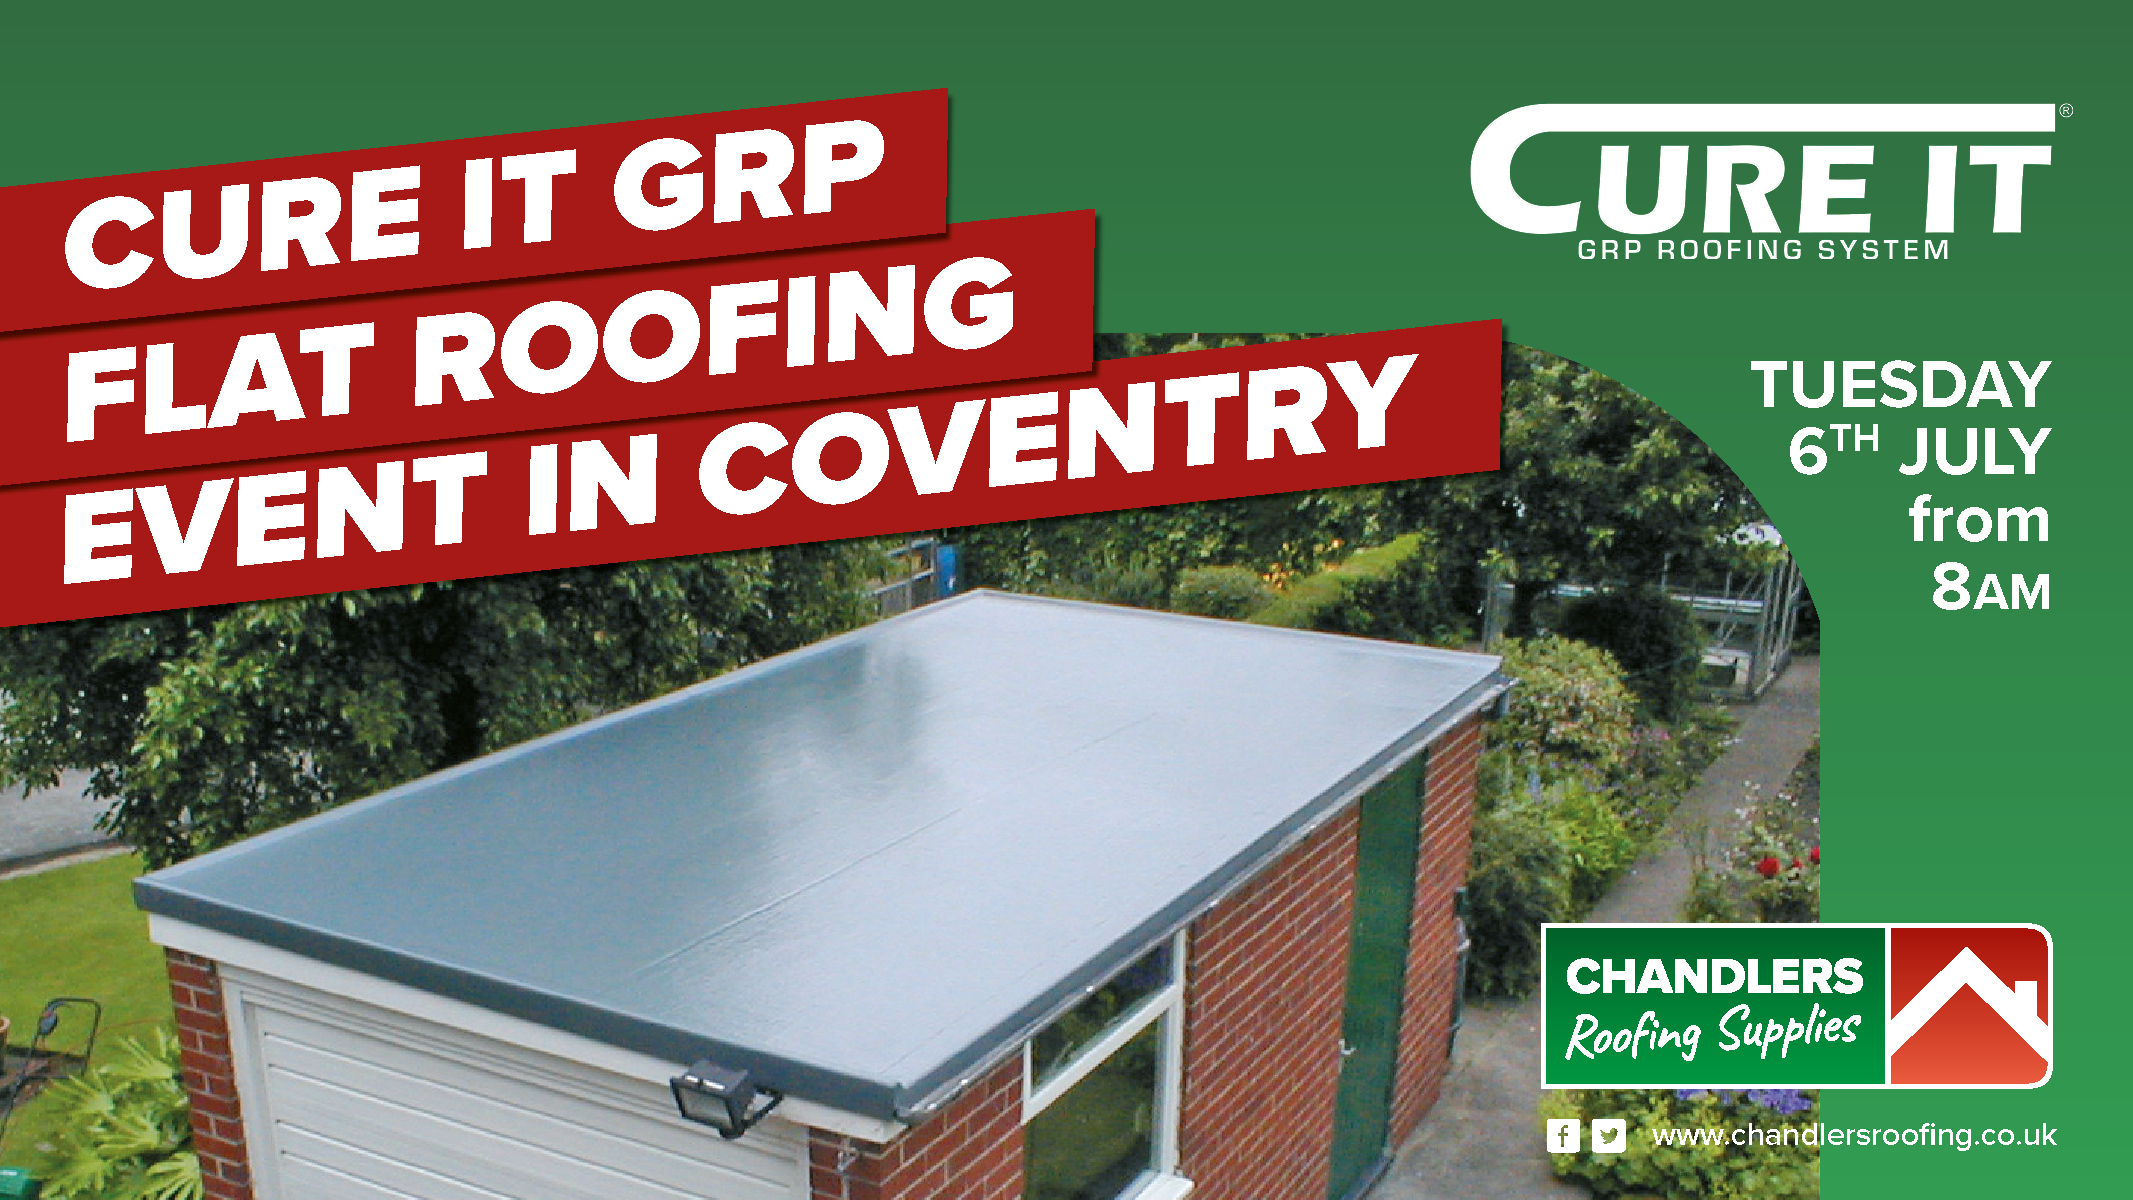 Cure It GRP Roofing Morning to Take Place in Coventry